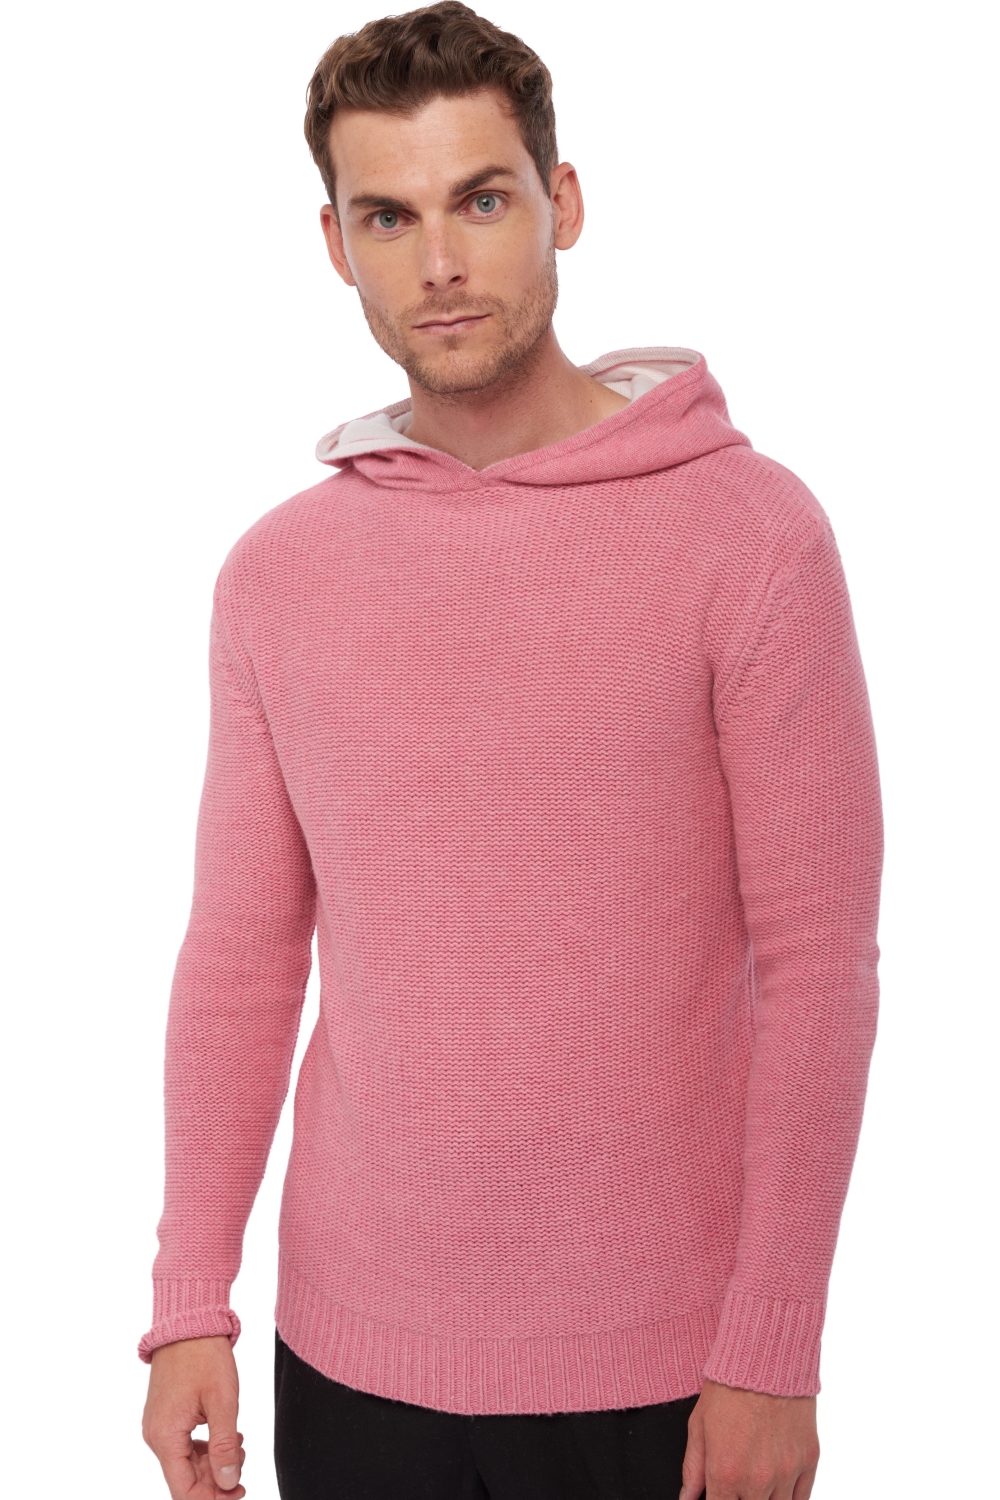 Yak pull homme epais conor pink blanc casse 3xl